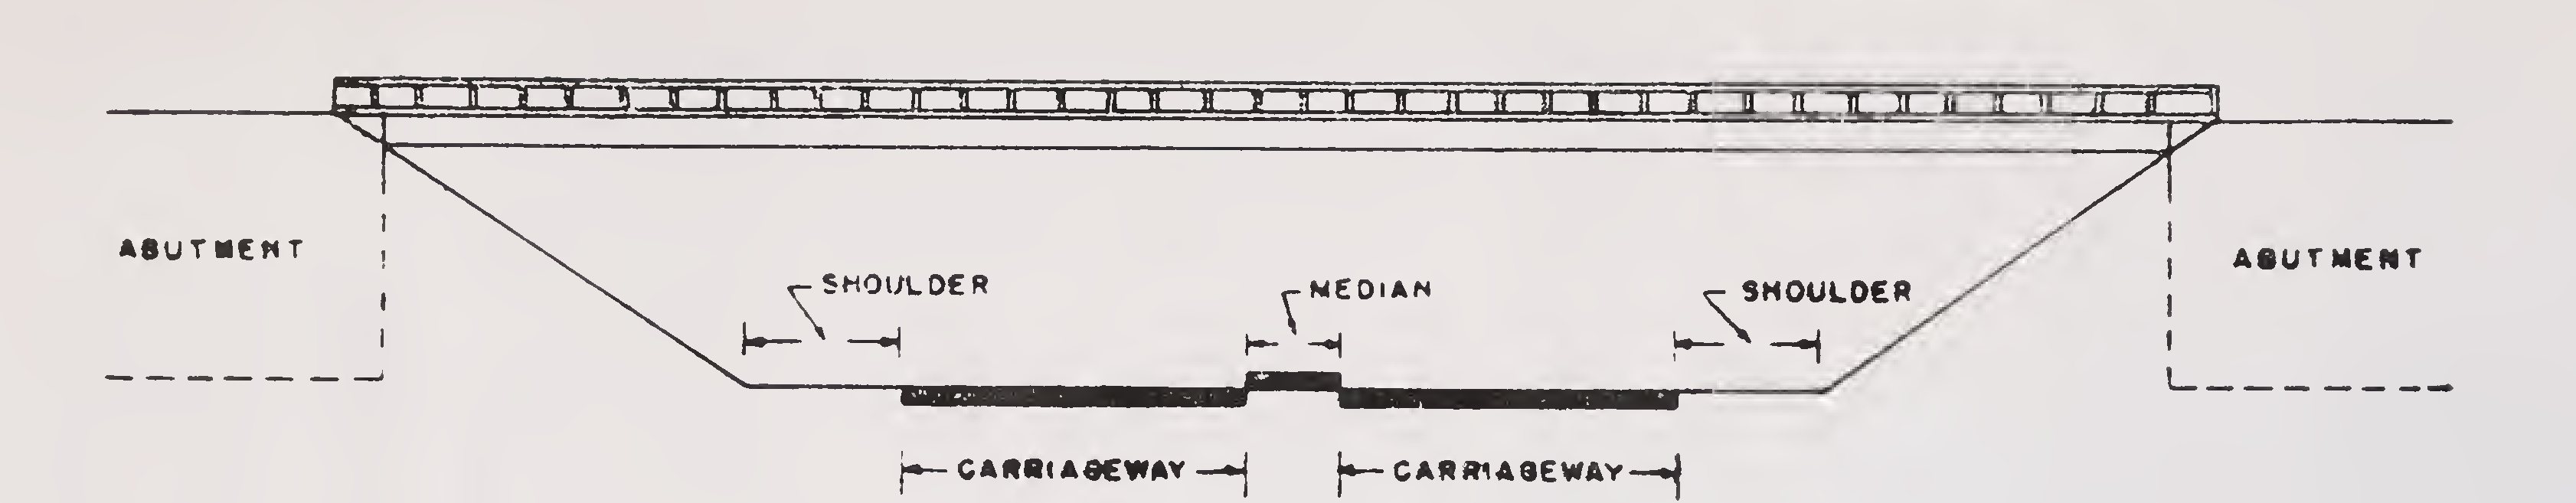 fig.1. Underpass with open and spans